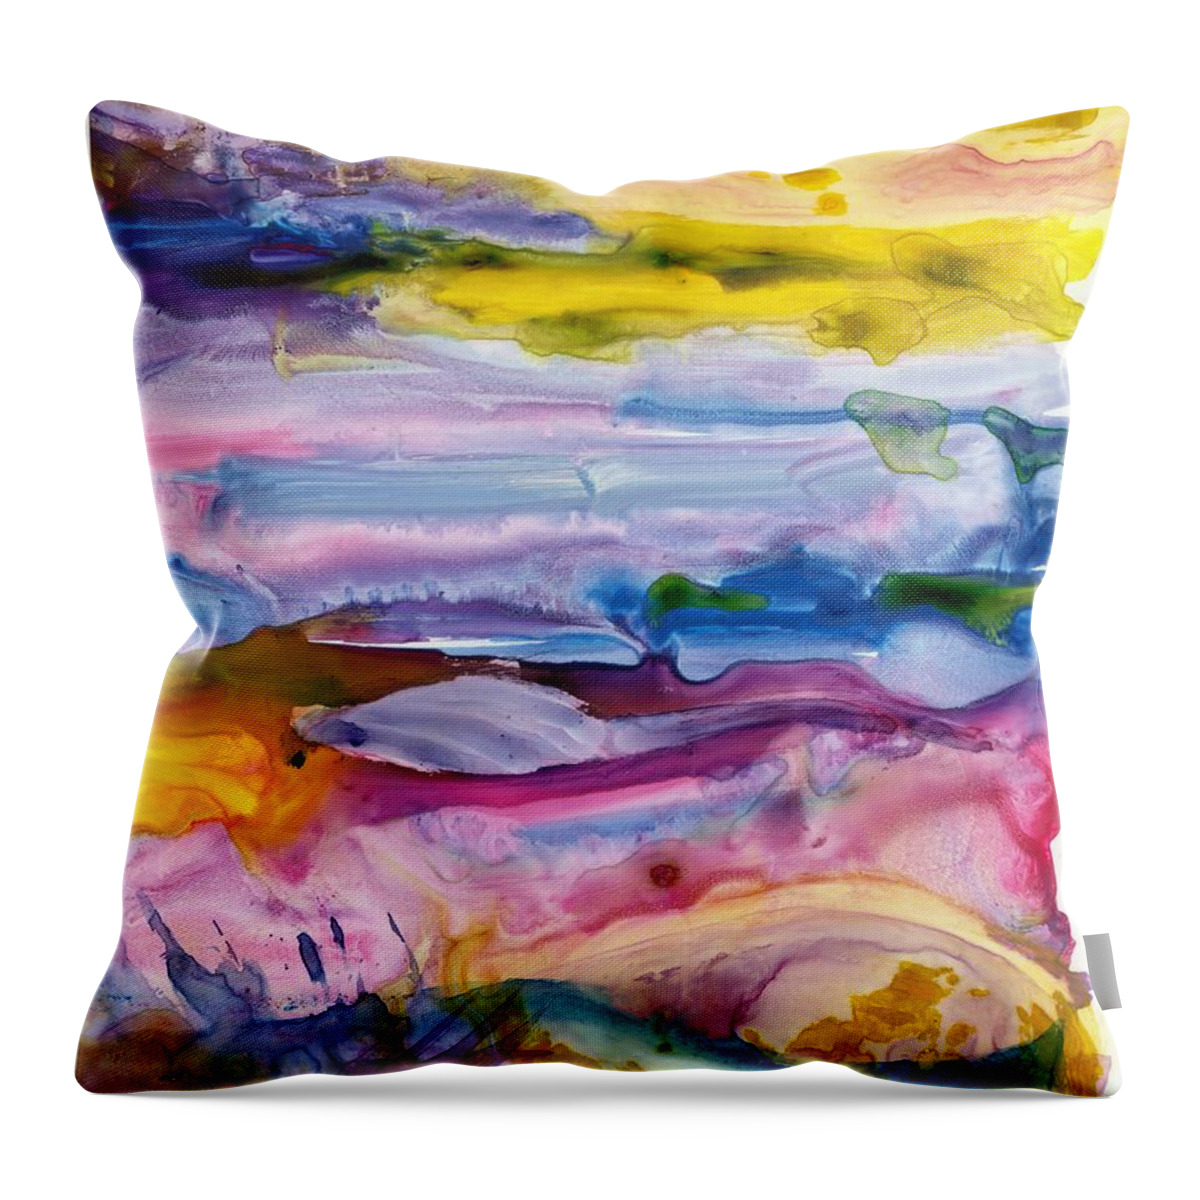 Primary Color Throw Pillow featuring the painting Primary Seascape by Tammy Nara